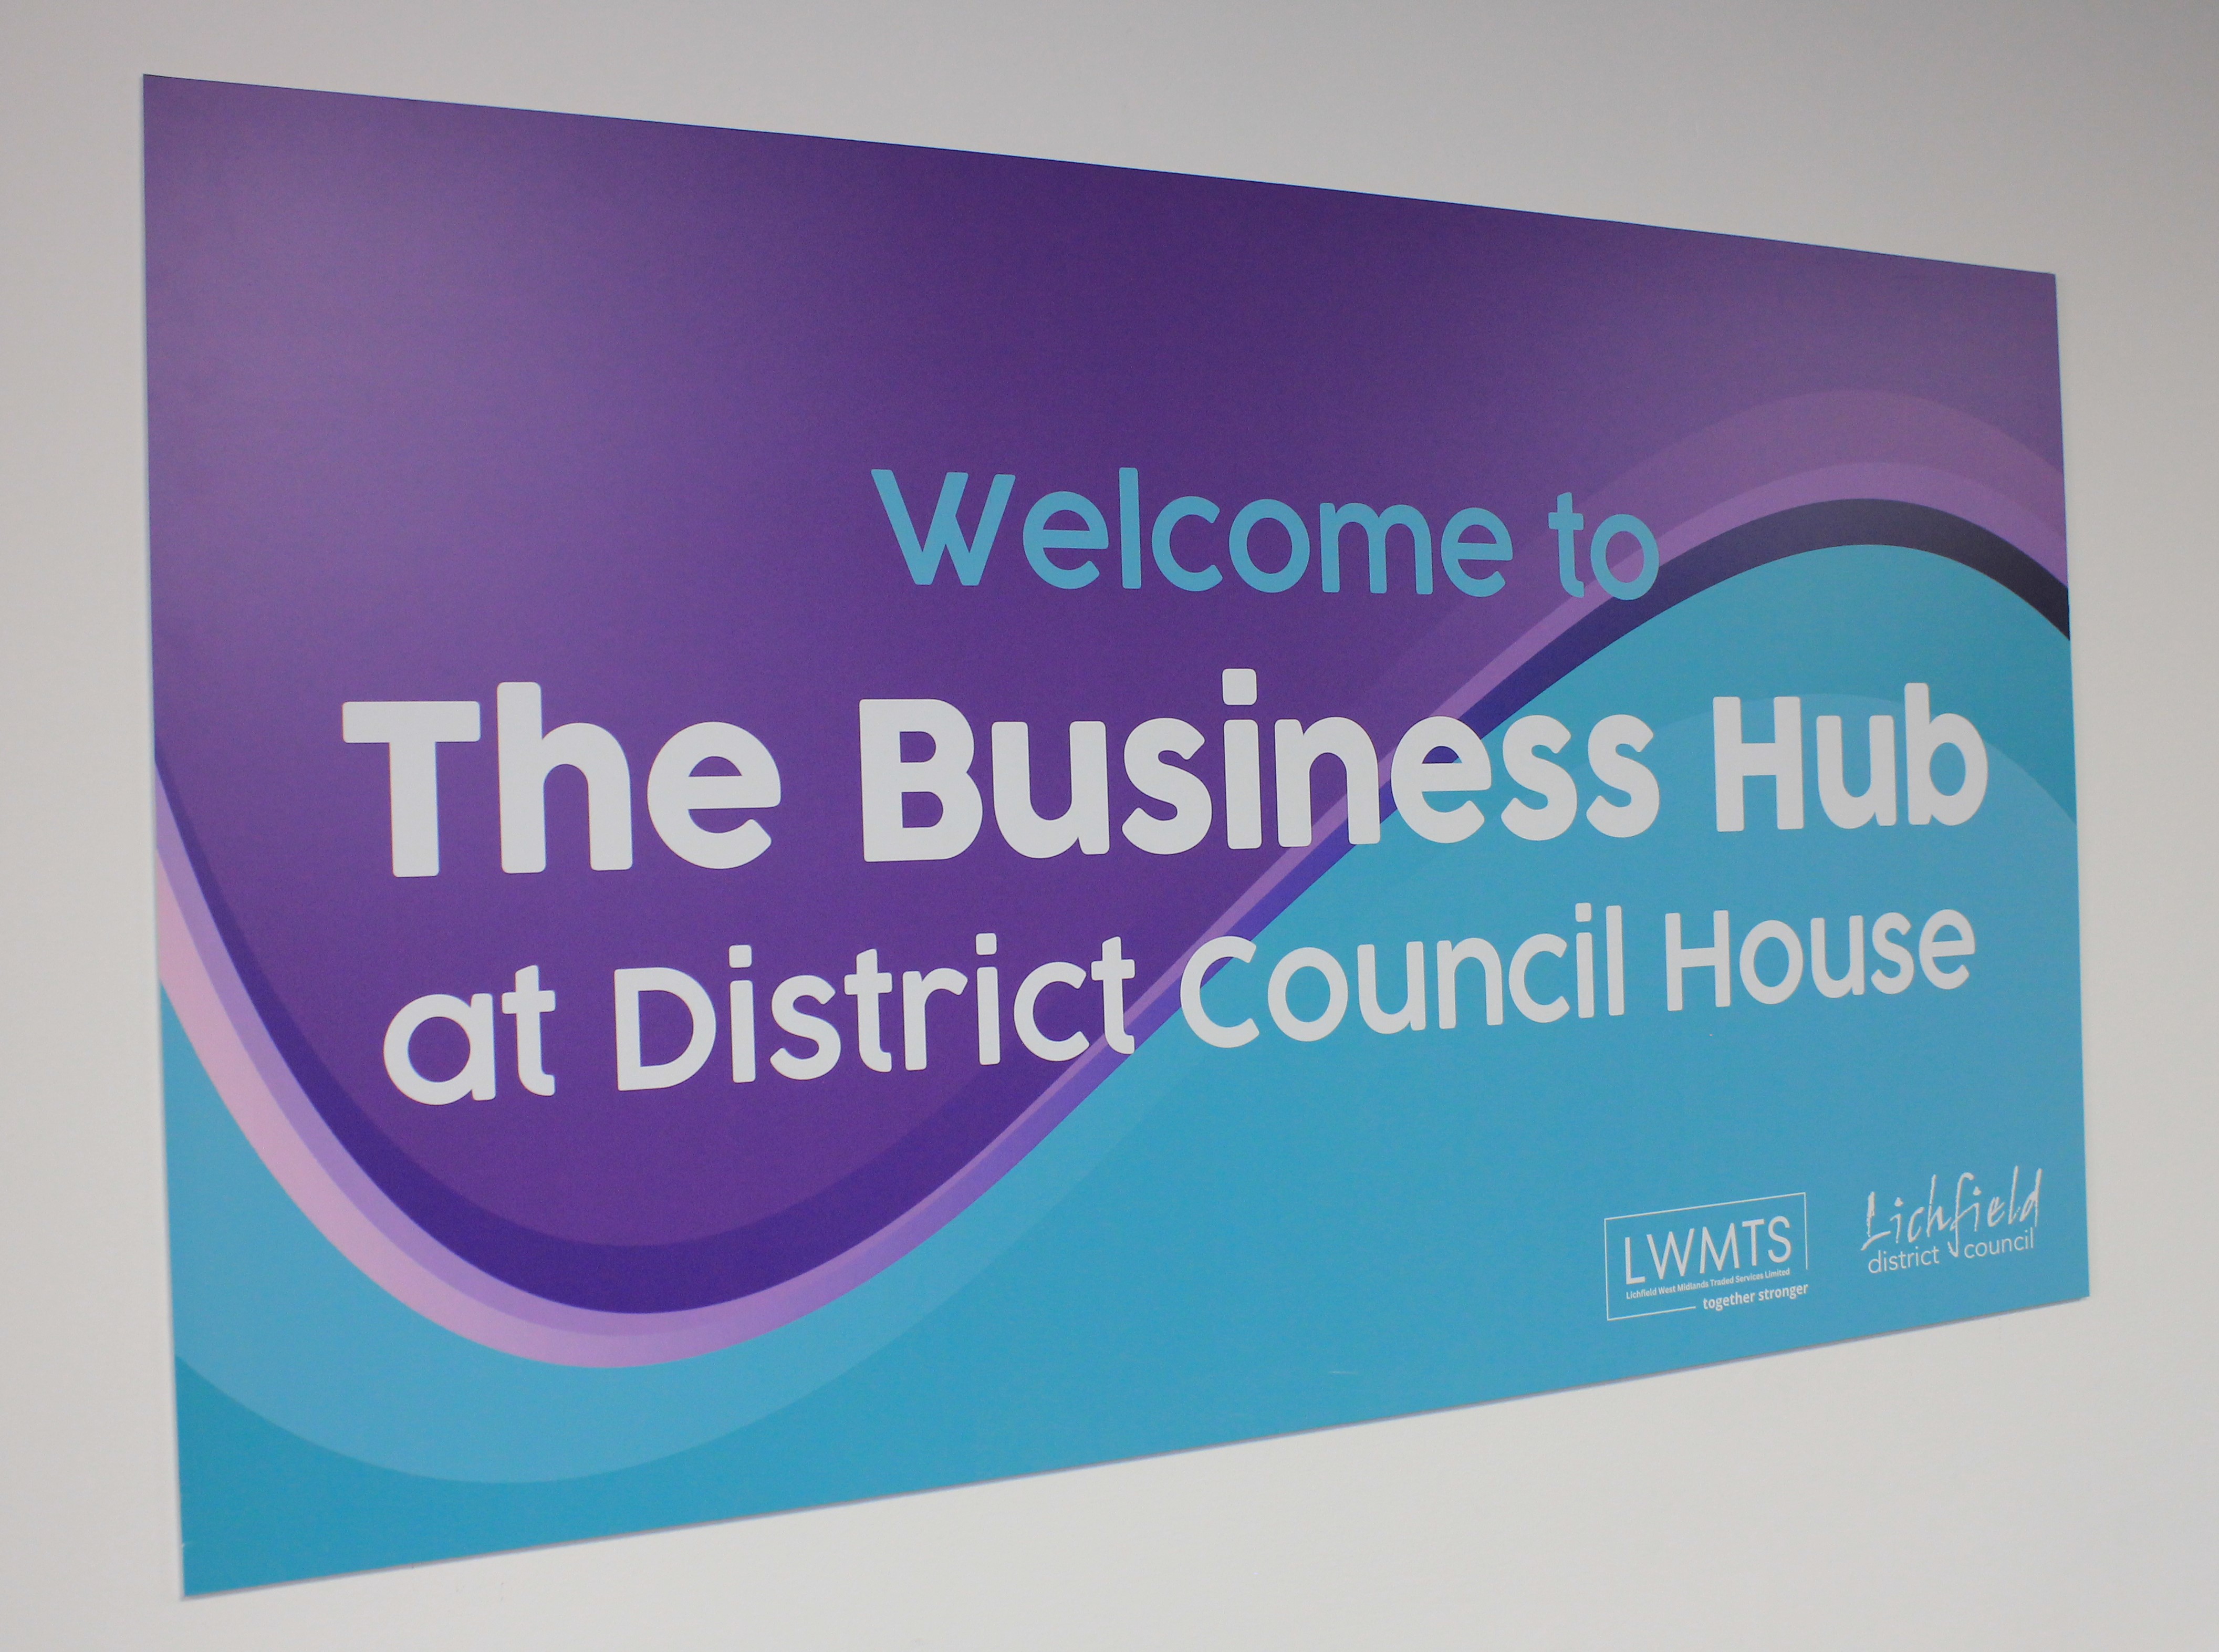 The Business Hub at Lichfield District Council.